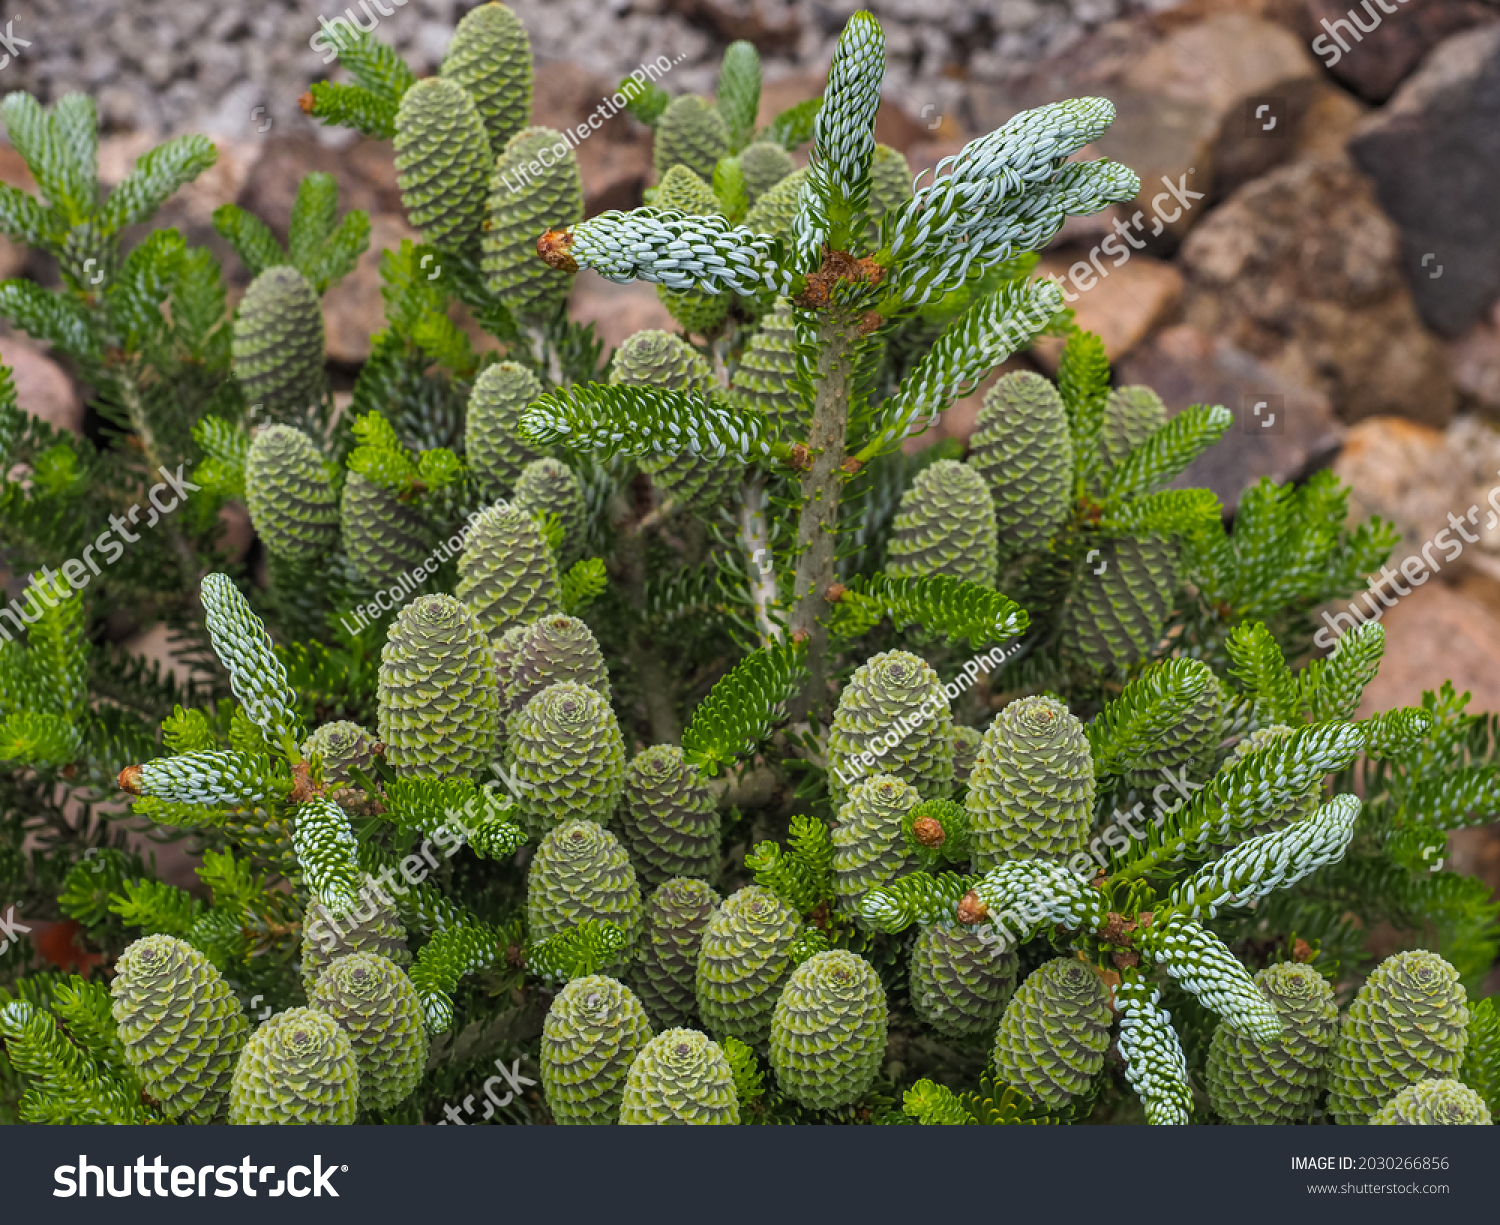 Korean fir or Abies koreana, green immature cones stand upright on the branches next to needle-like leaves, close up. European silver fir is evergreen, coniferous tree in the family Pinaceae. #2030266856